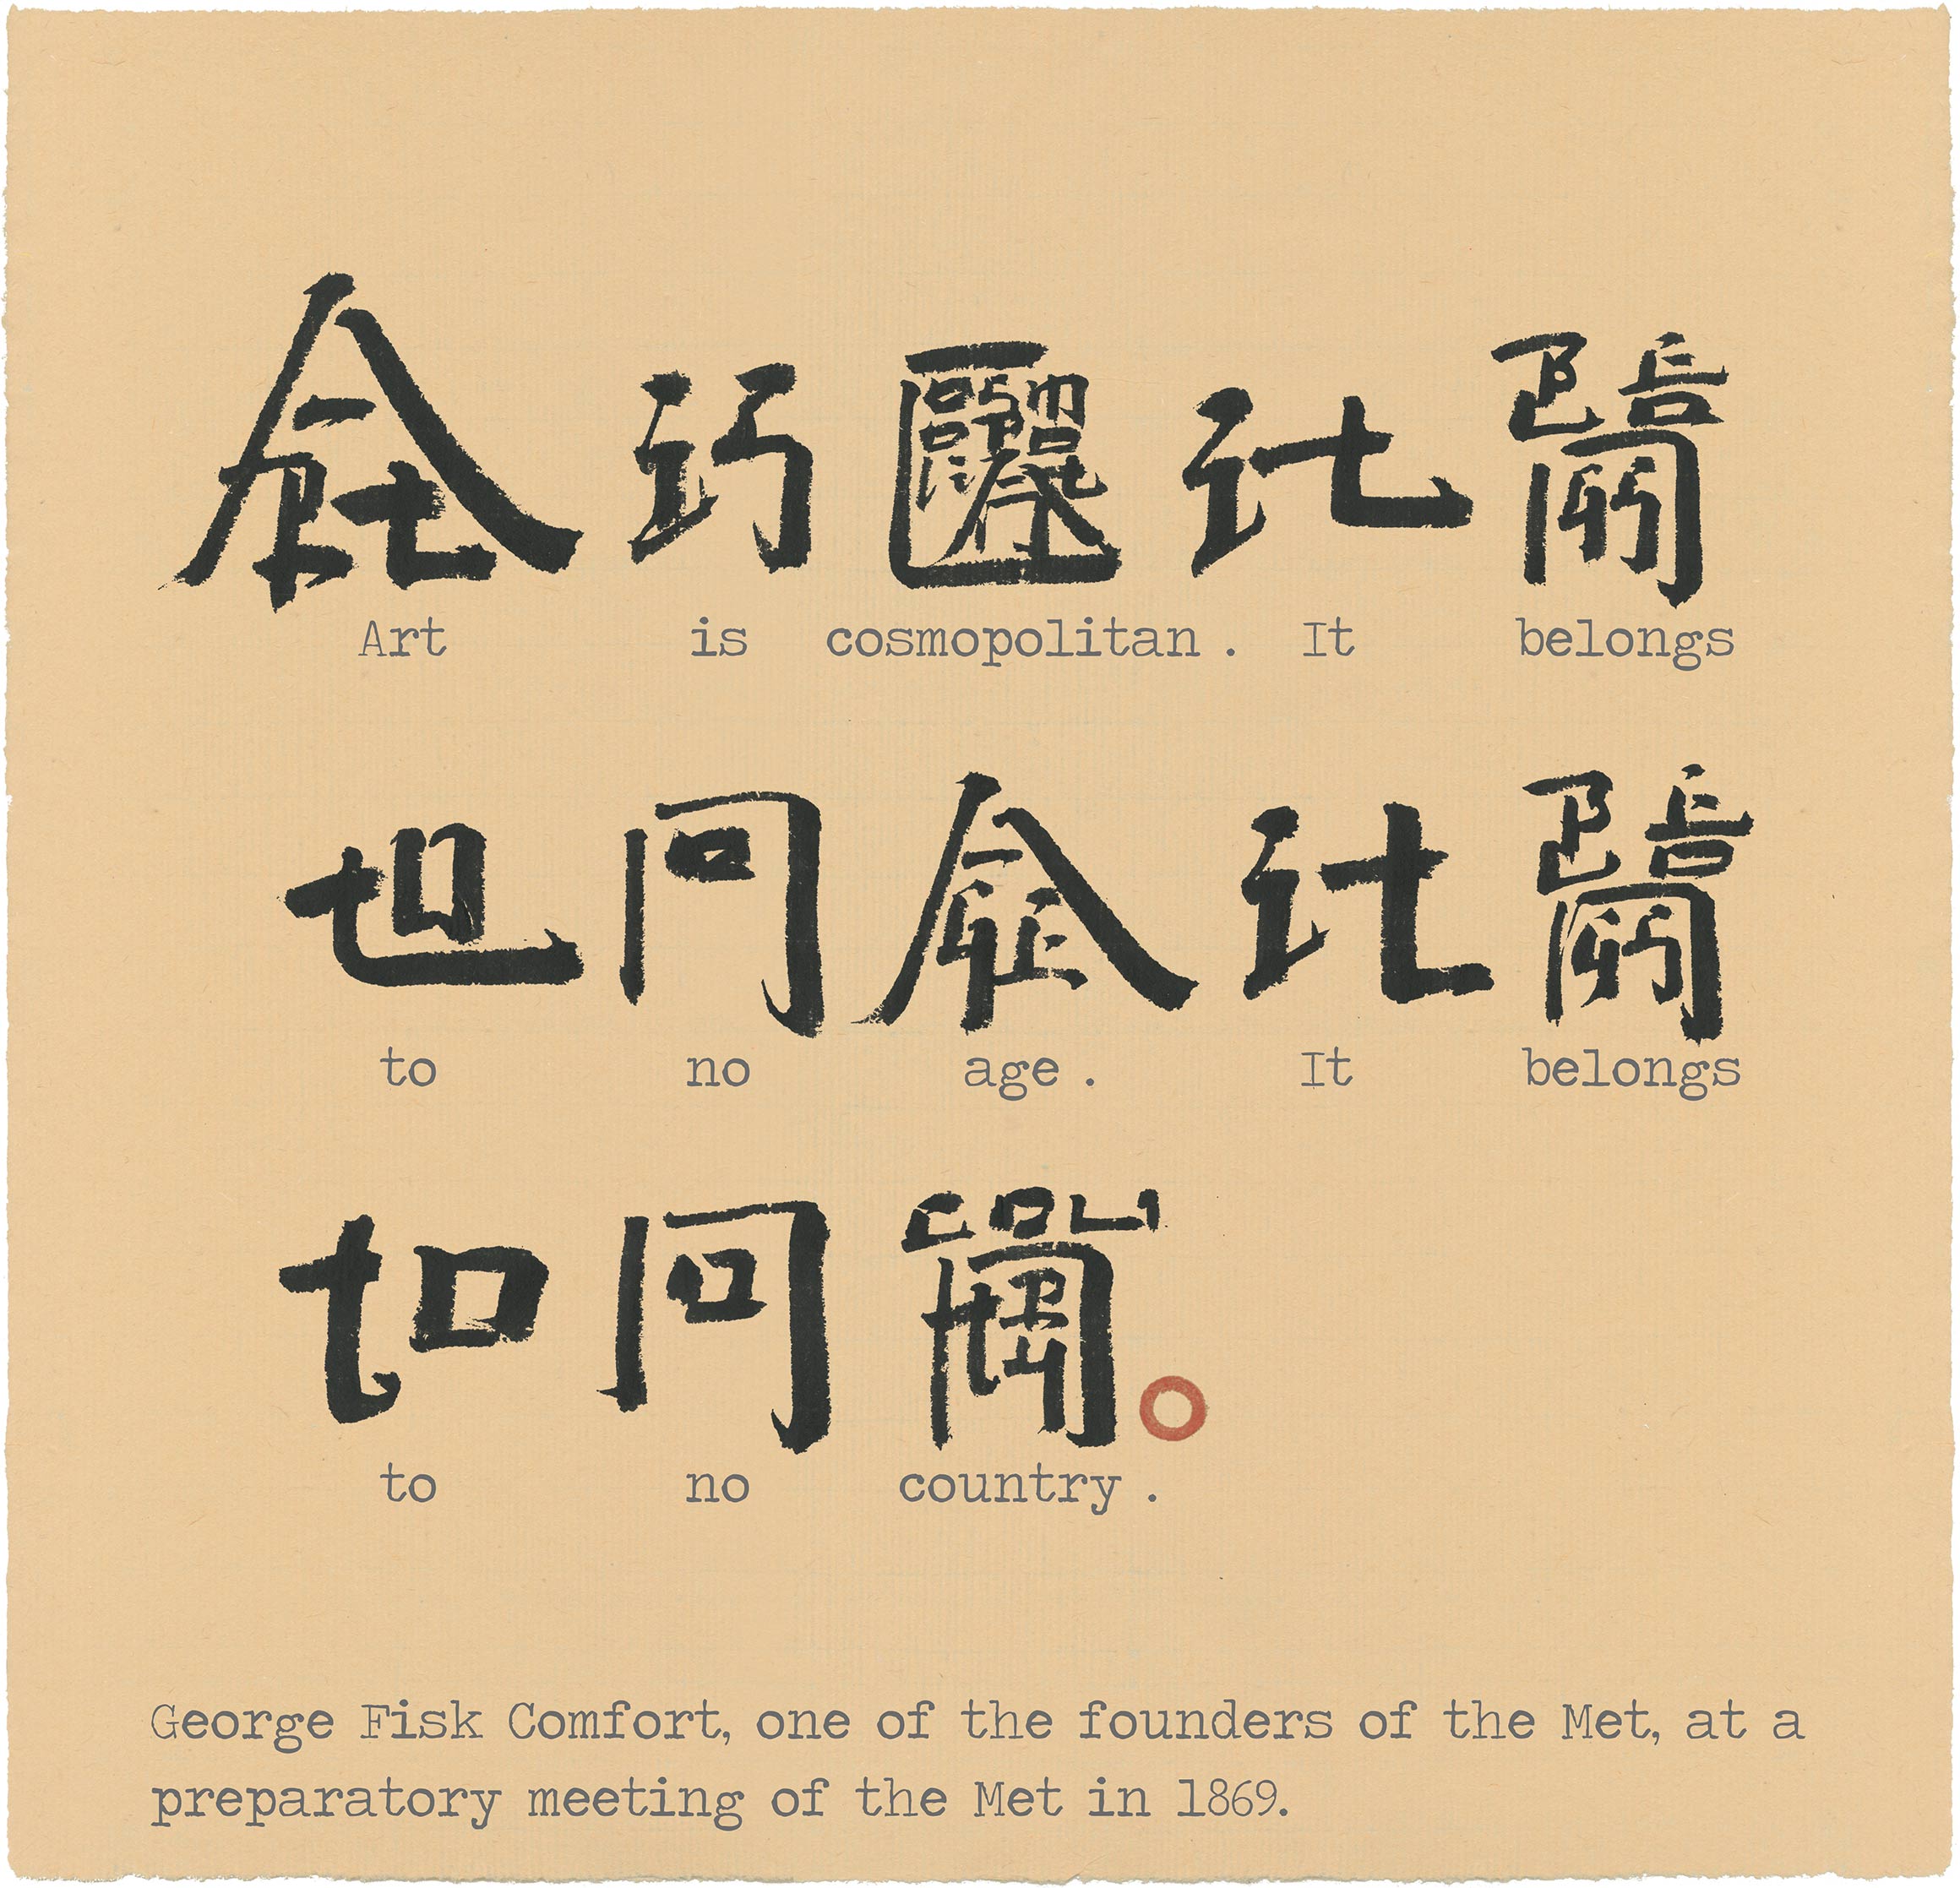 Chinese and English characters reading, "Art is cosmopolitan. It belongs to no age. It belongs to no country." and underneath in English, "George Fisk Comfort, one of the founders of the MET, at a preparatory meeting of the MET in 1869."